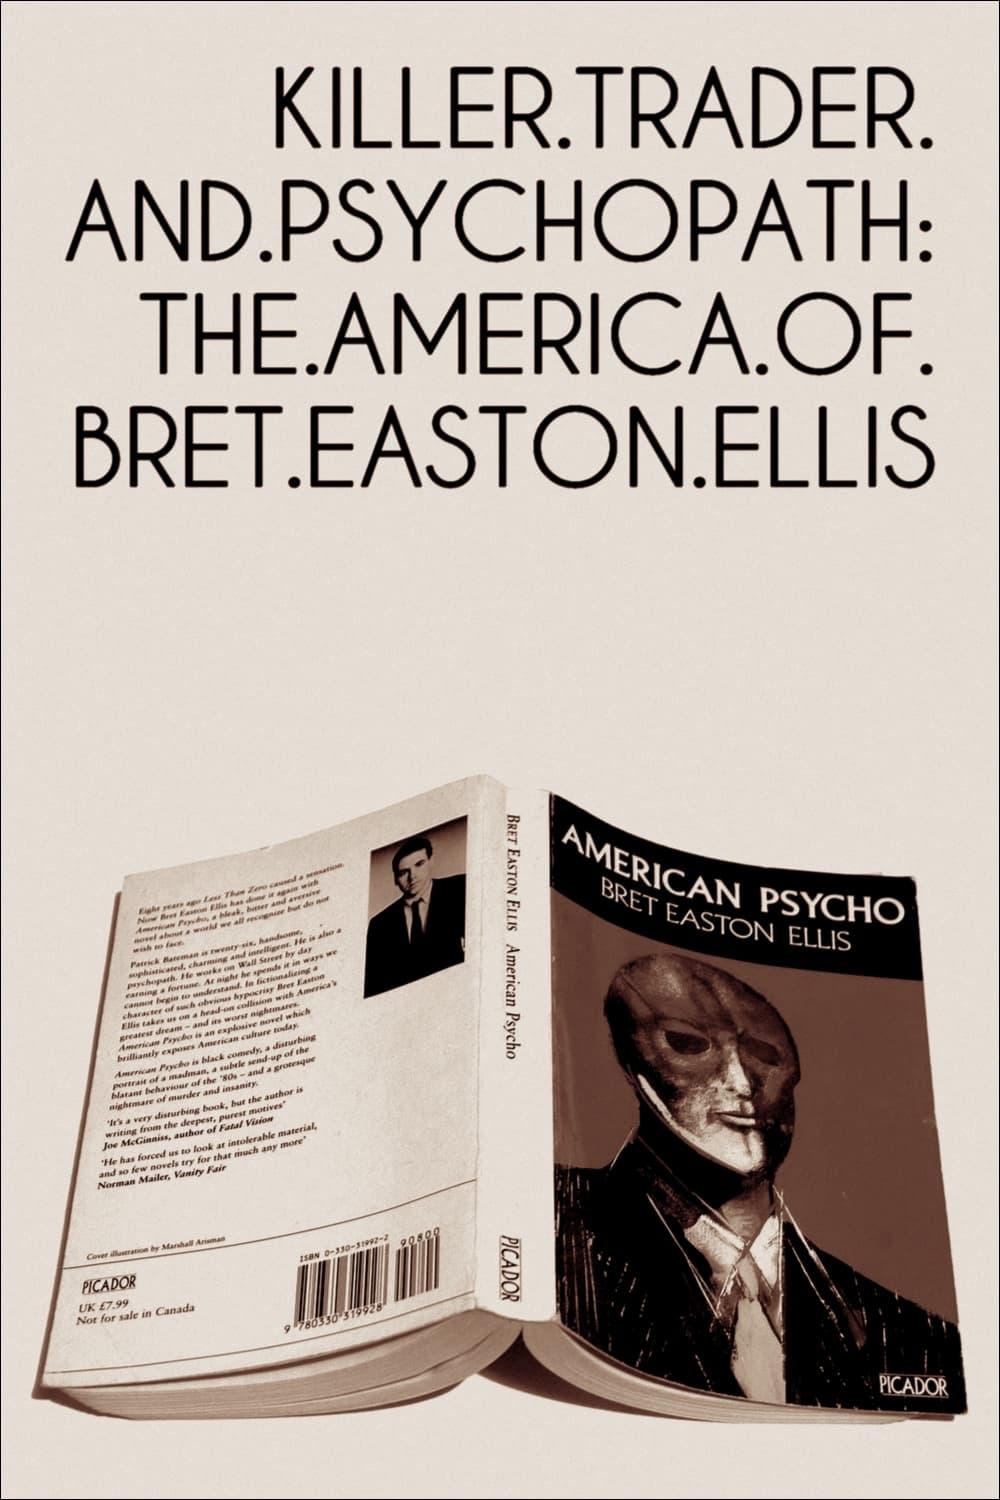 Killer, Trader and Psychopath: The America of Bret Easton Ellis poster